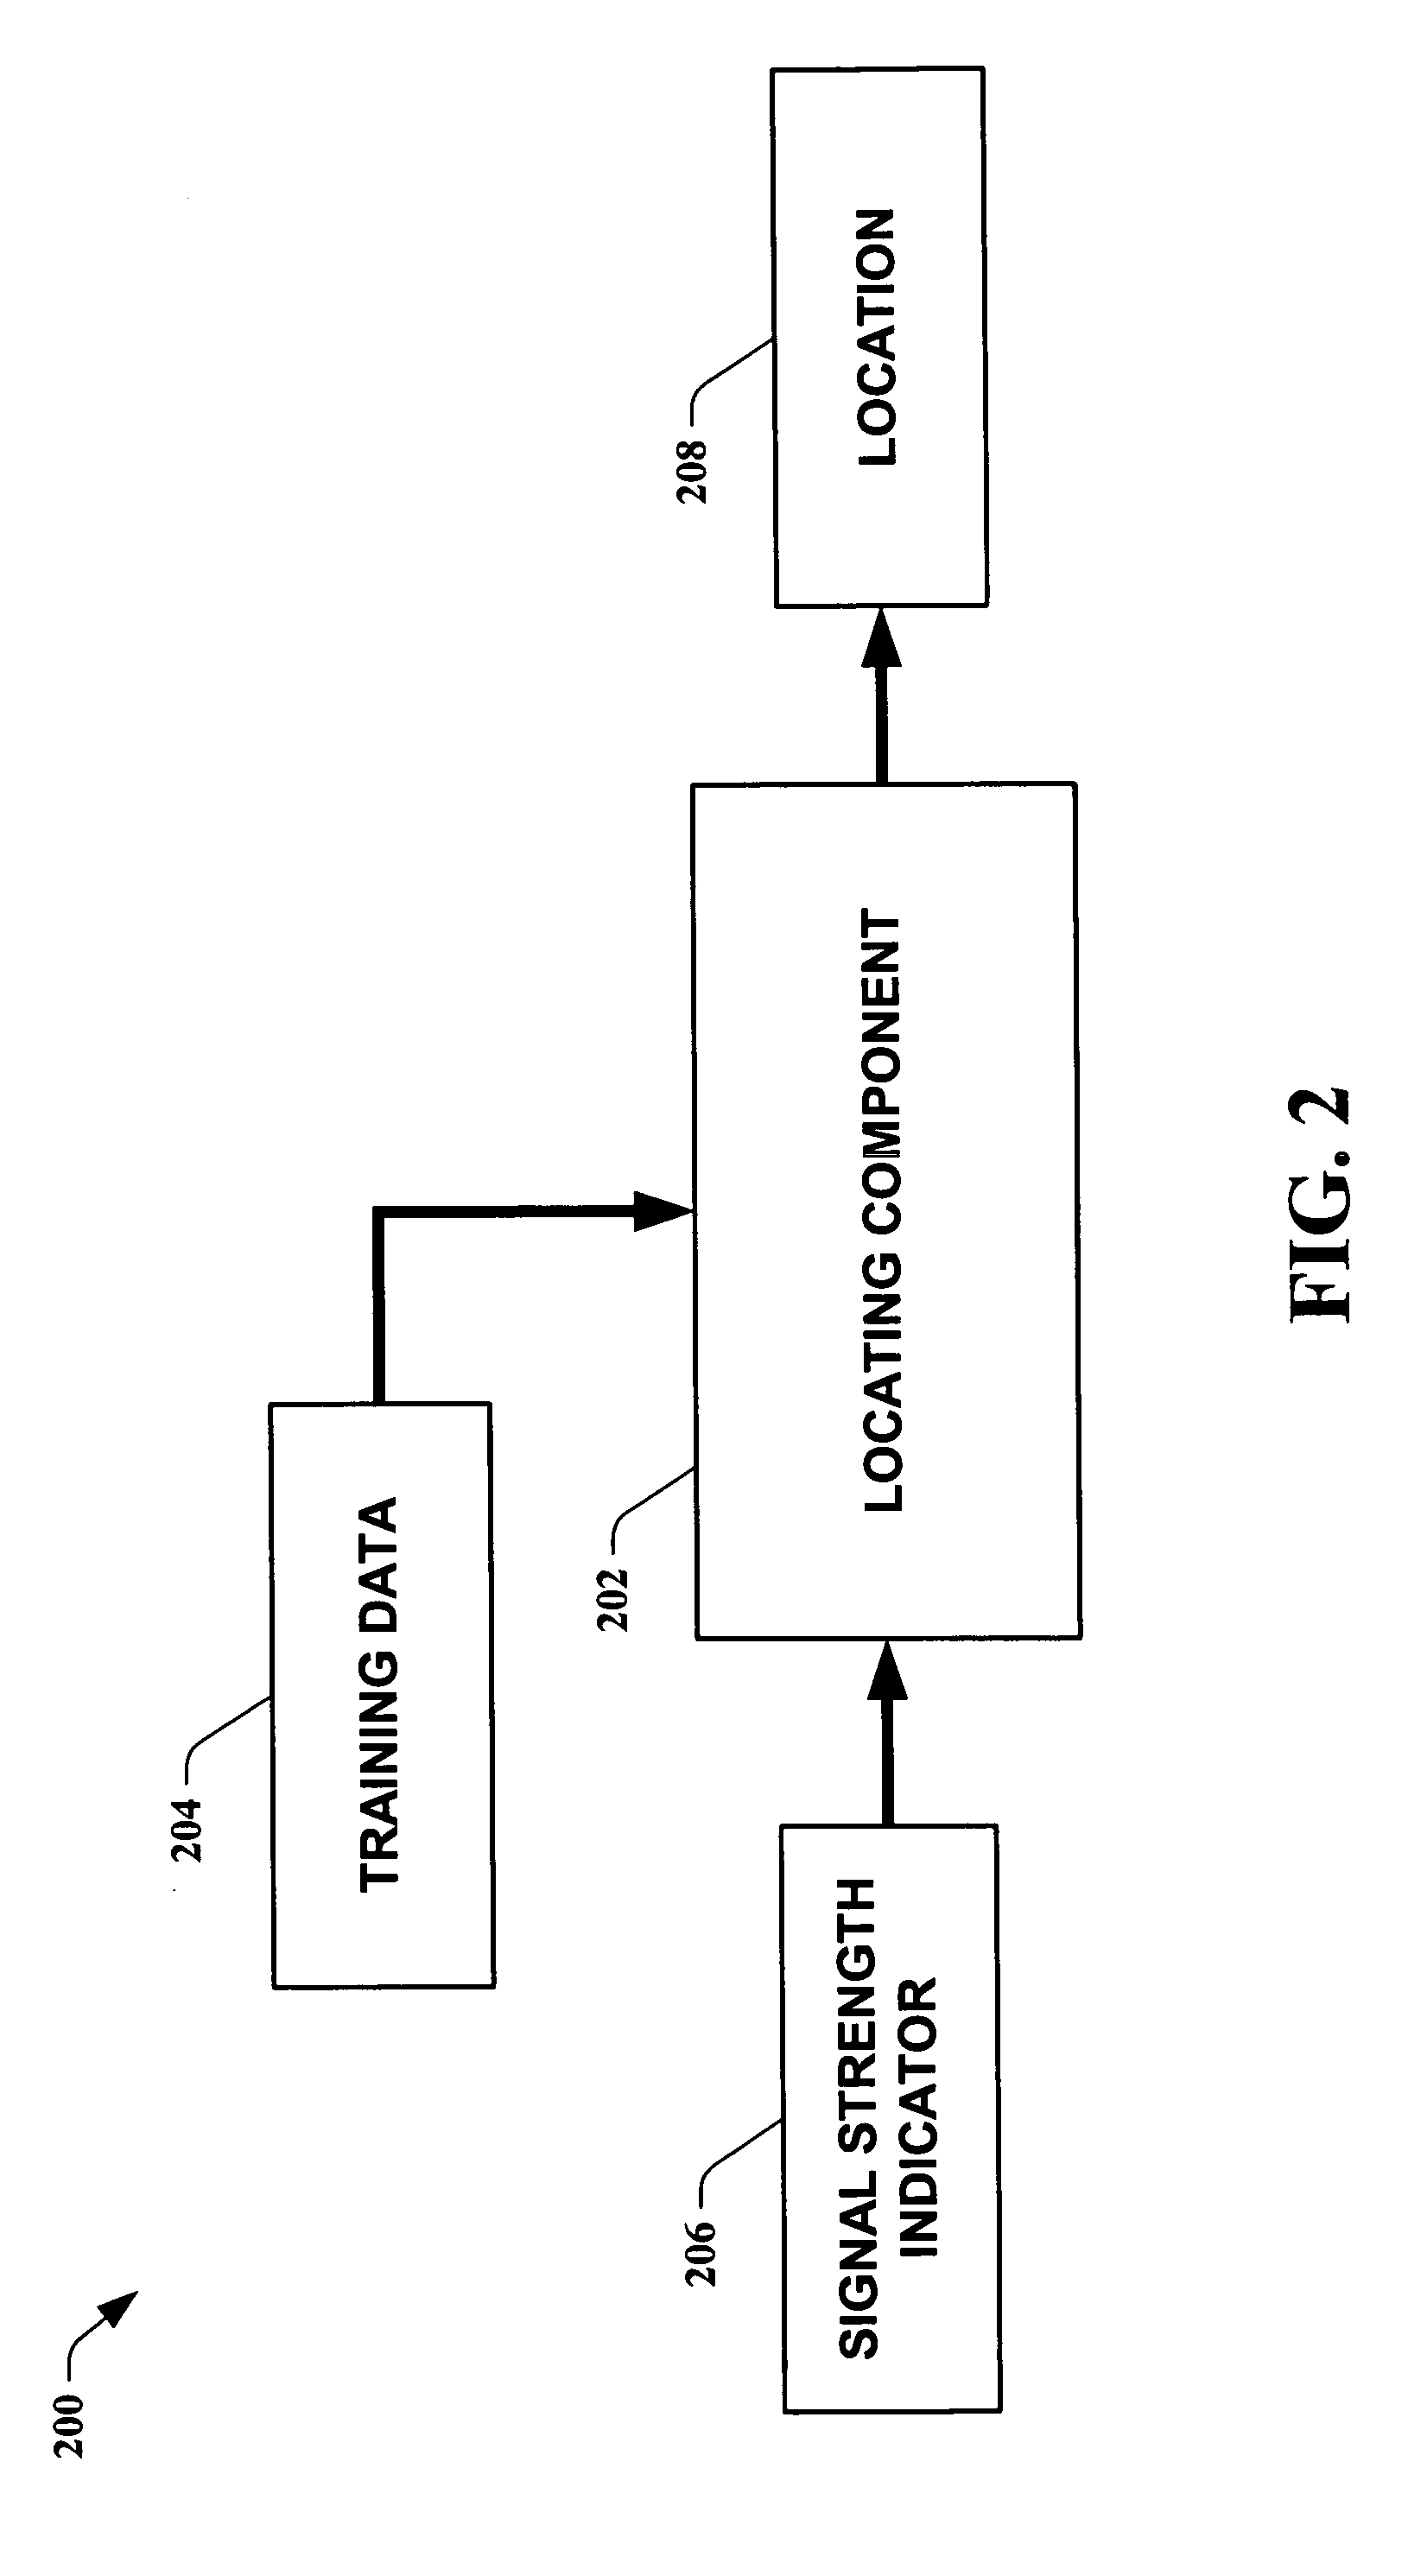 Utilization of the approximate location of a device determined from ambient signals